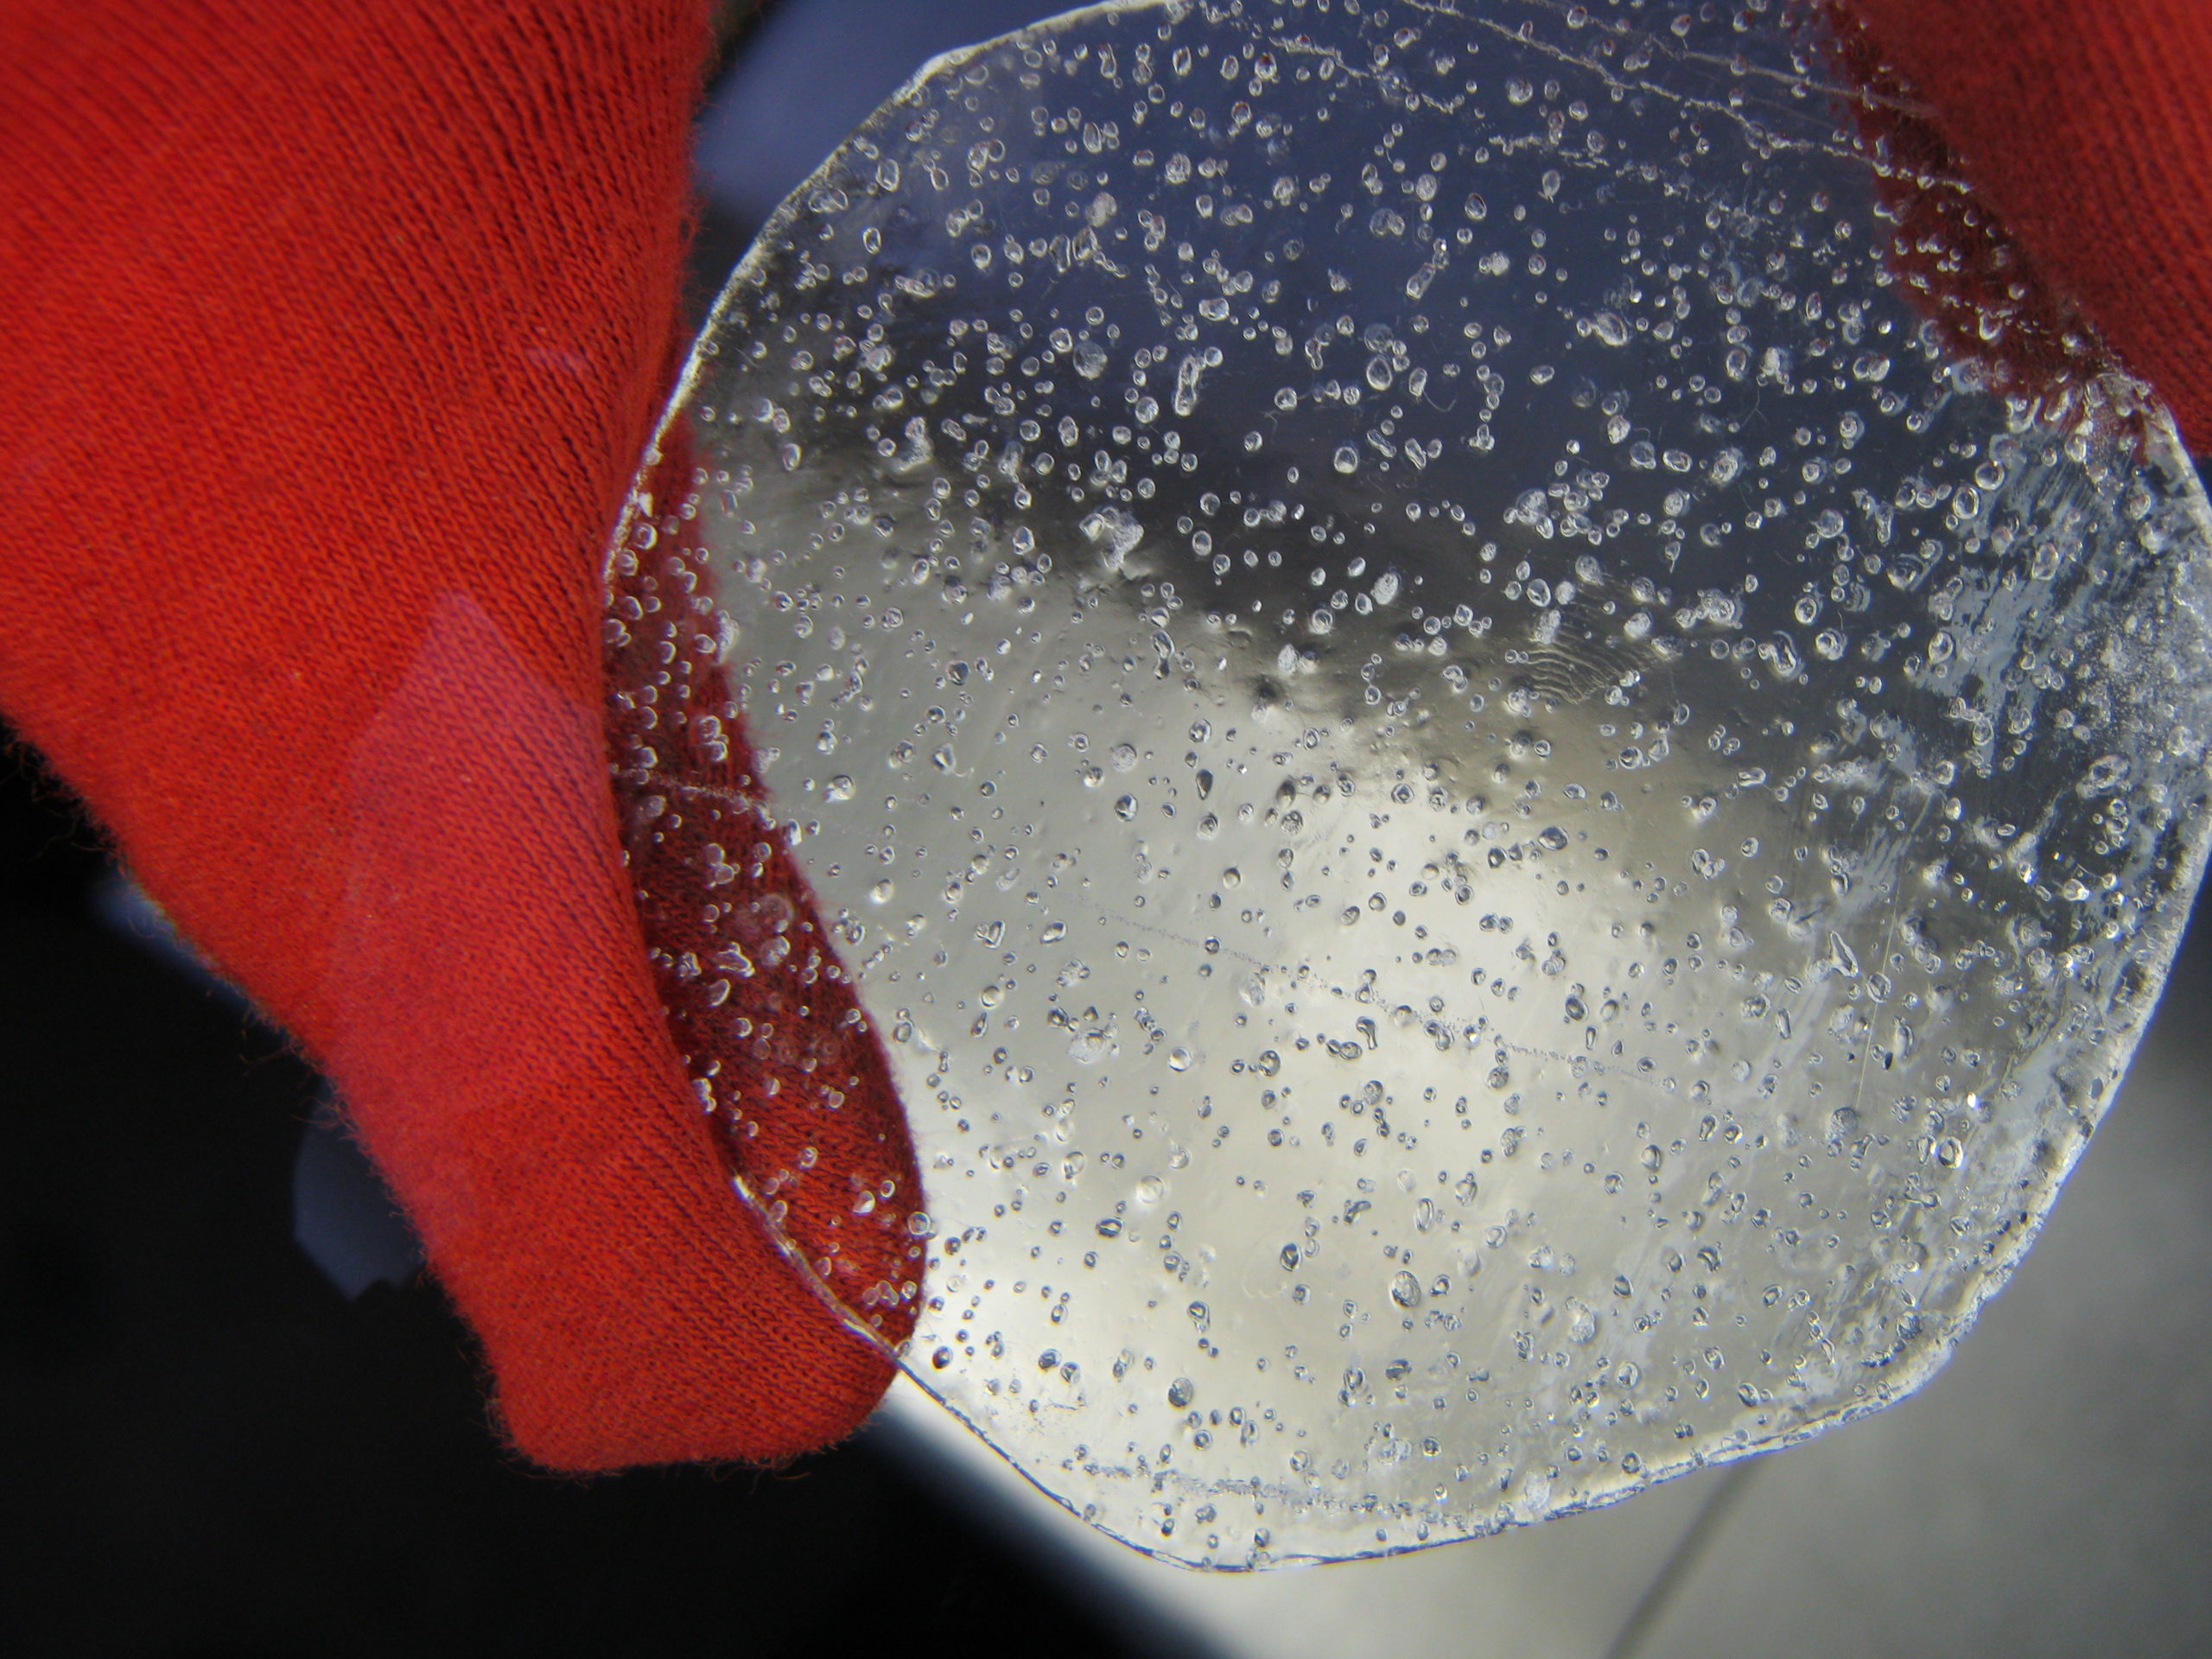 Ice core section showing air bubbles